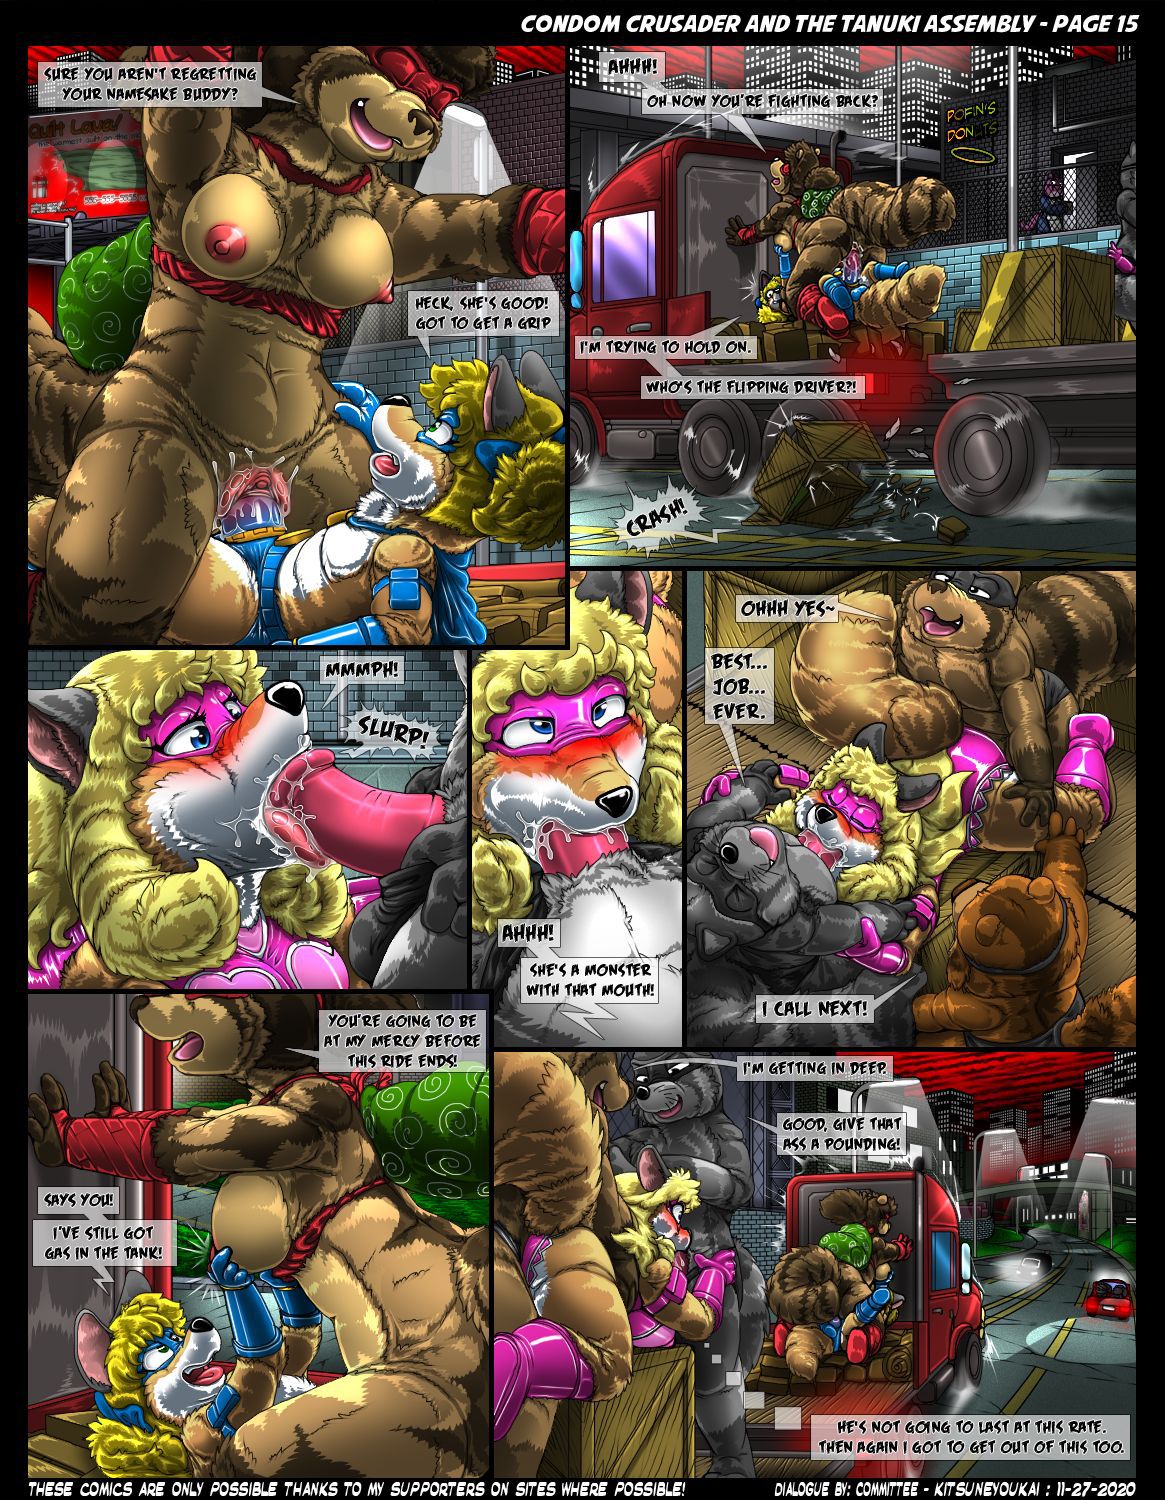 Condom Crusader and the Tanuki Assembly by Kitsune Youkai (Ongoing) 15